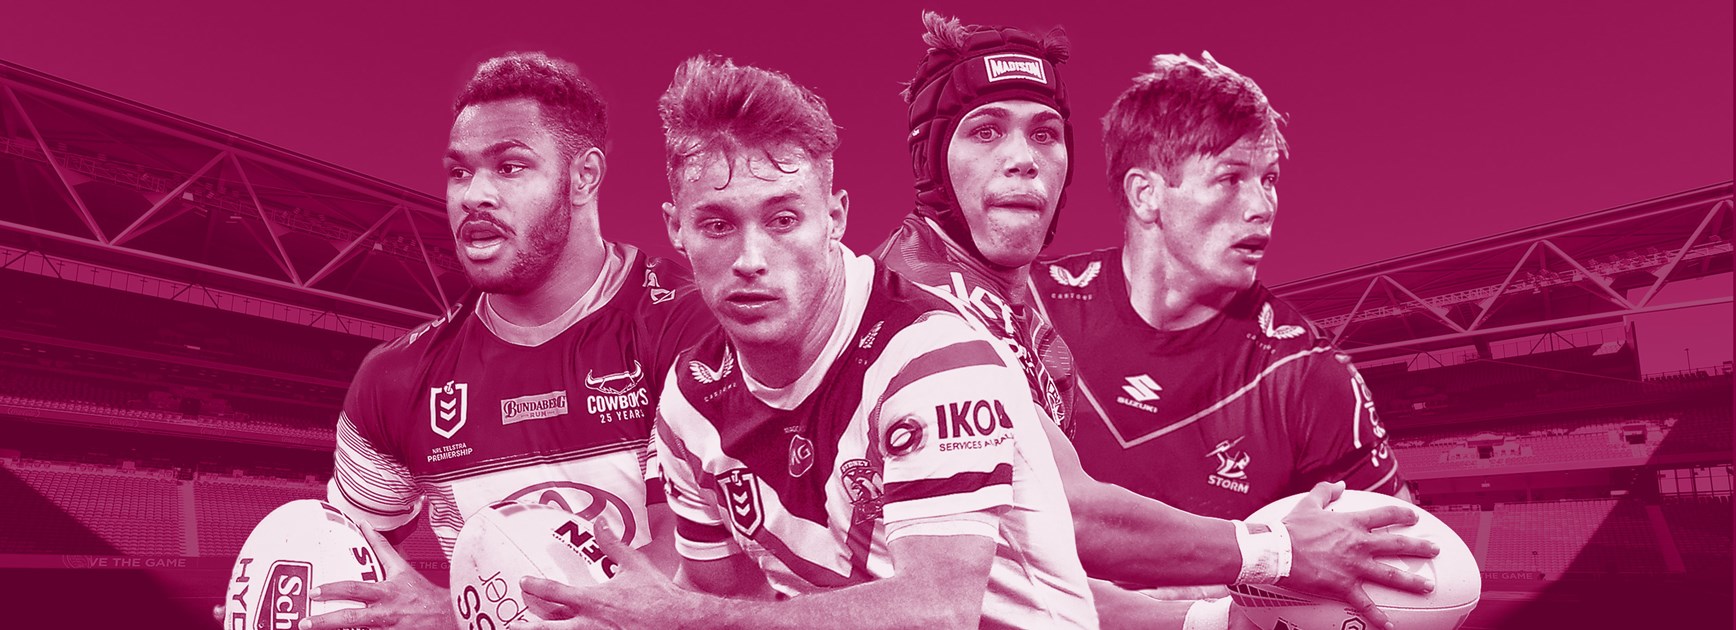 Young talent team: Why the Maroons are set to rise again